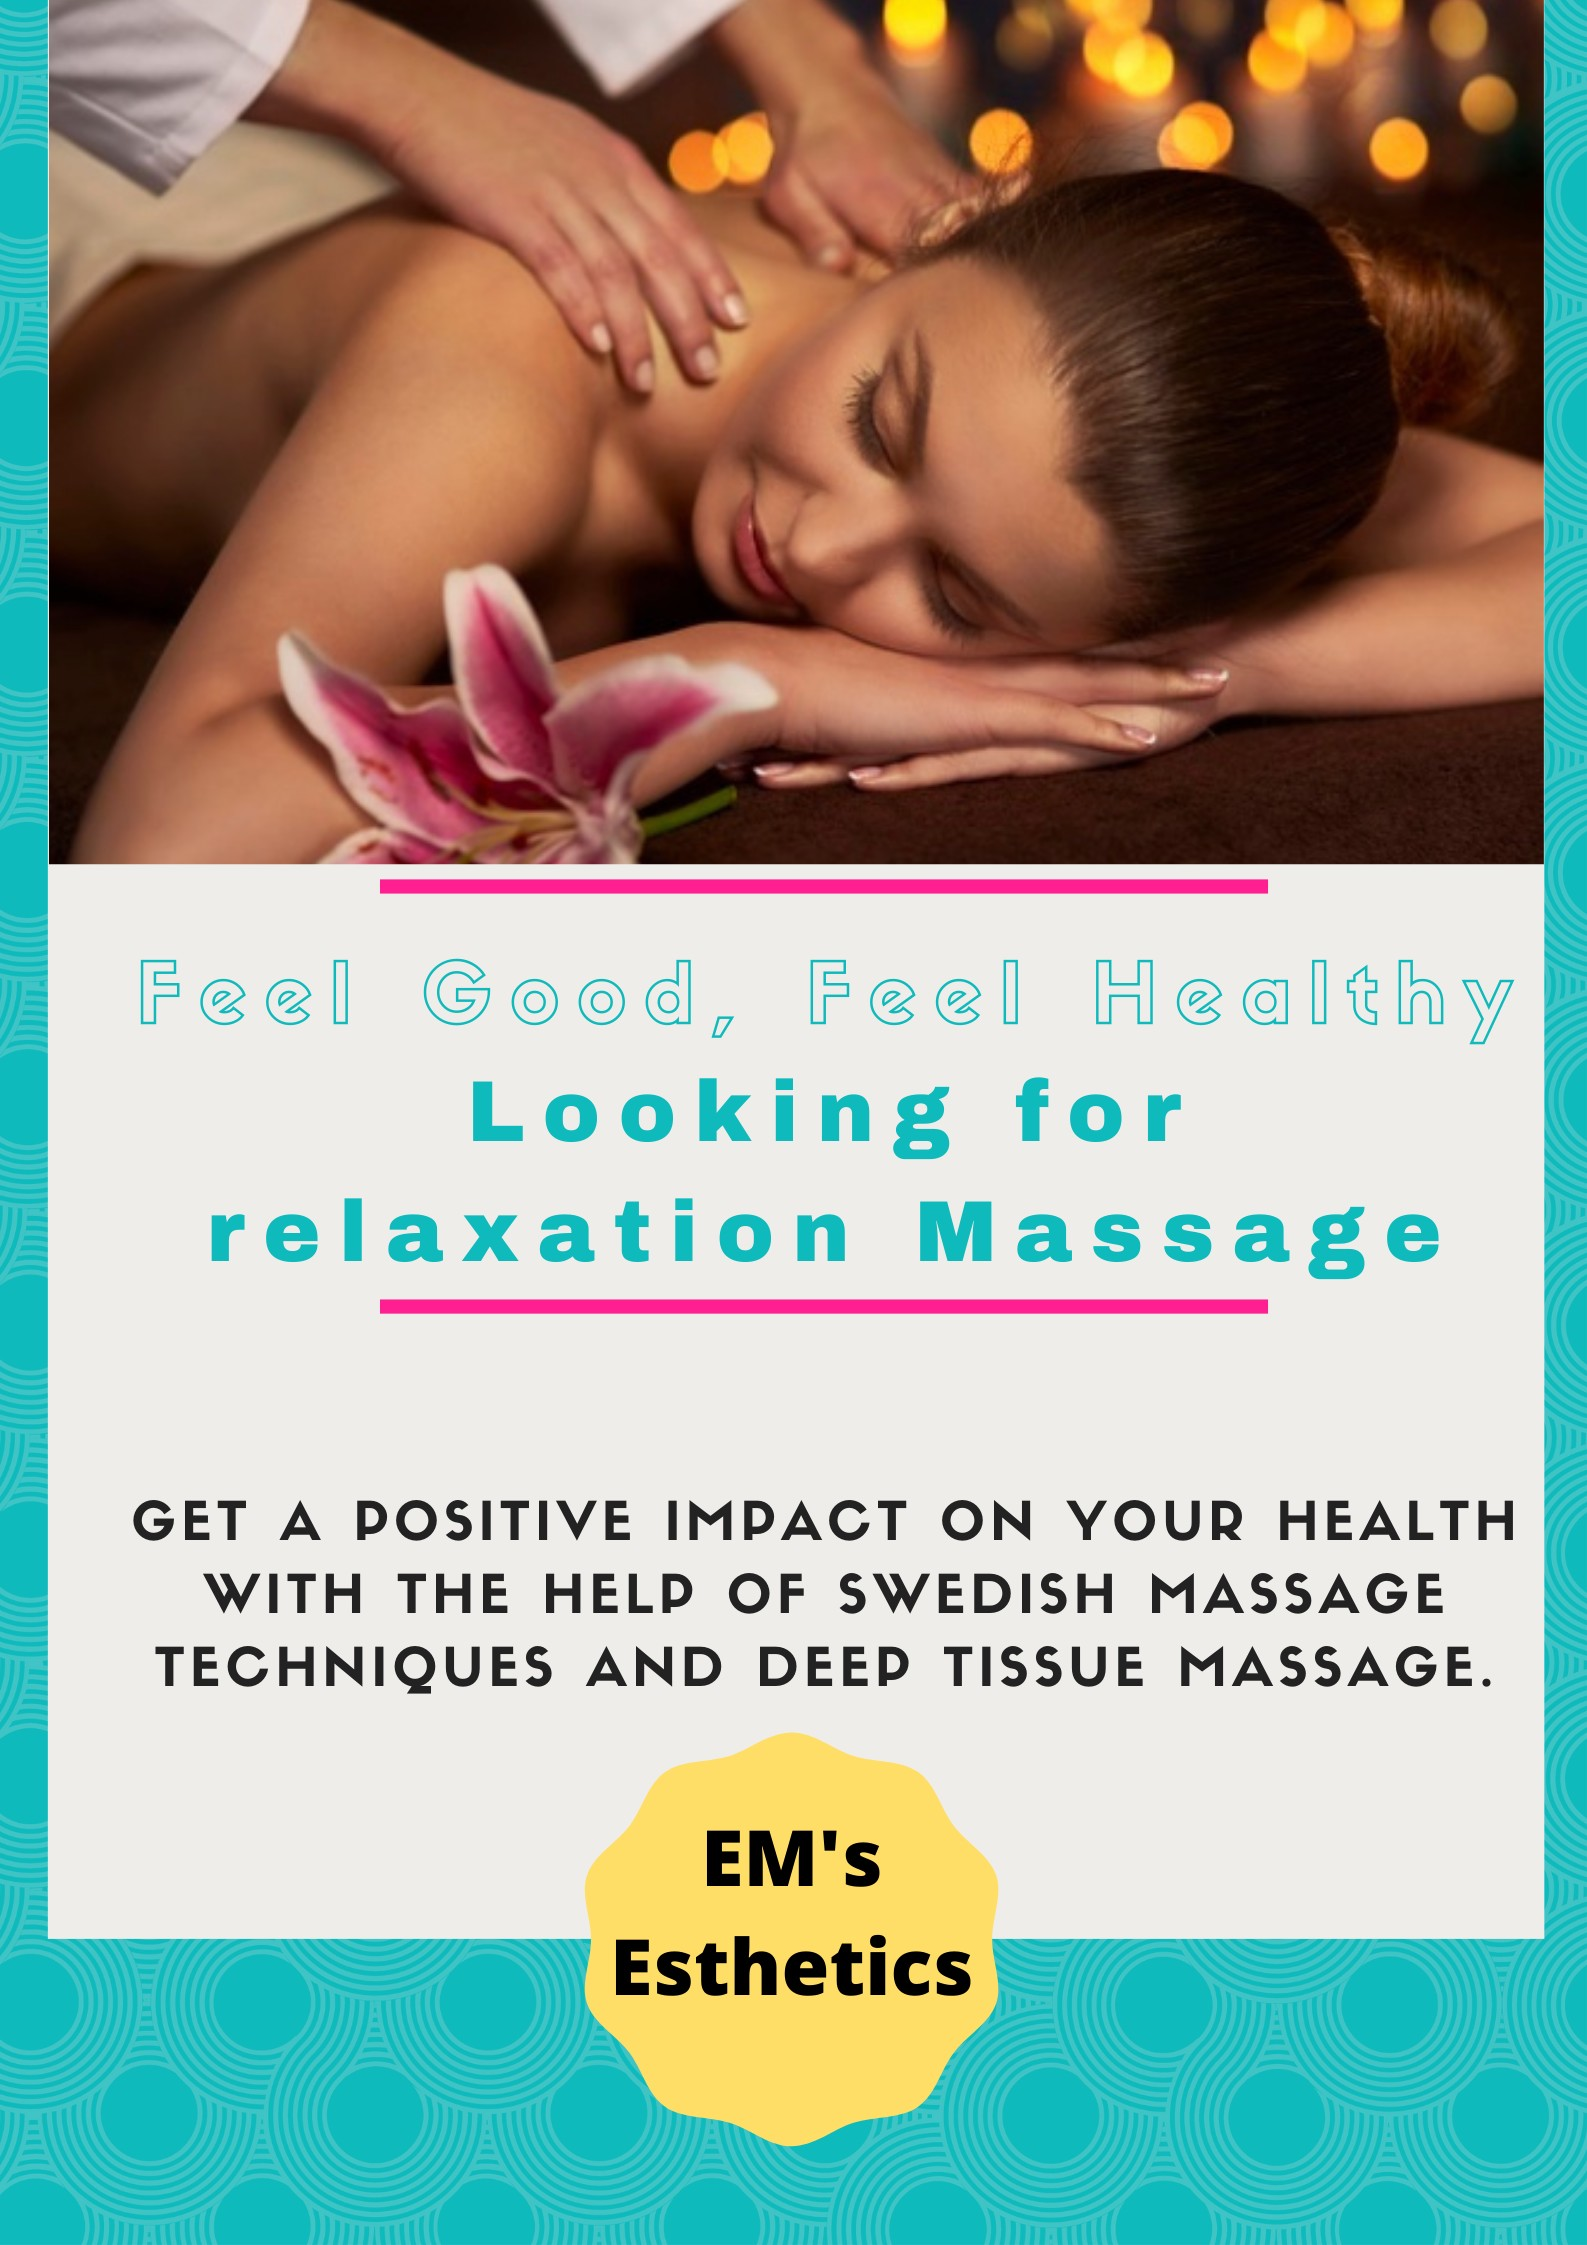 Get The Best Relaxation Massage in Vancouver